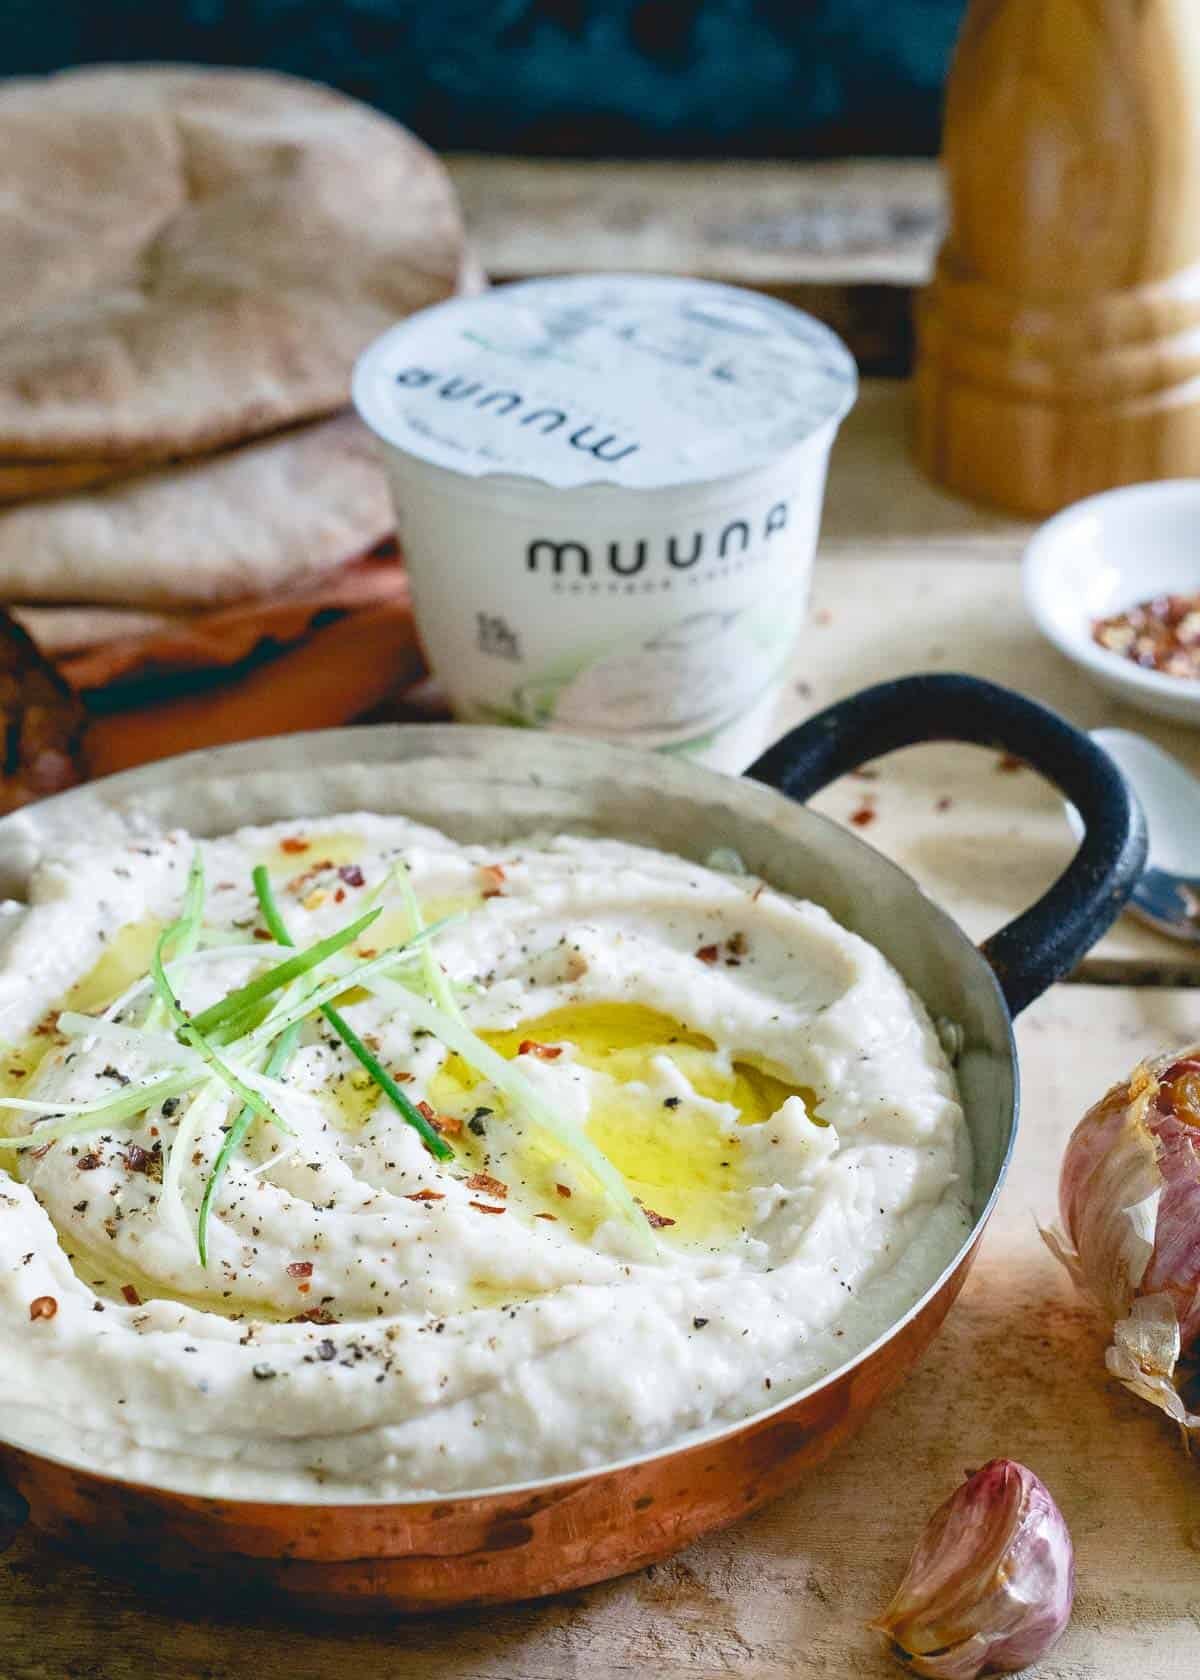 Cottage cheese is the perfect creamy addition to this roasted garlic white bean dip for an added healthy protein boost.